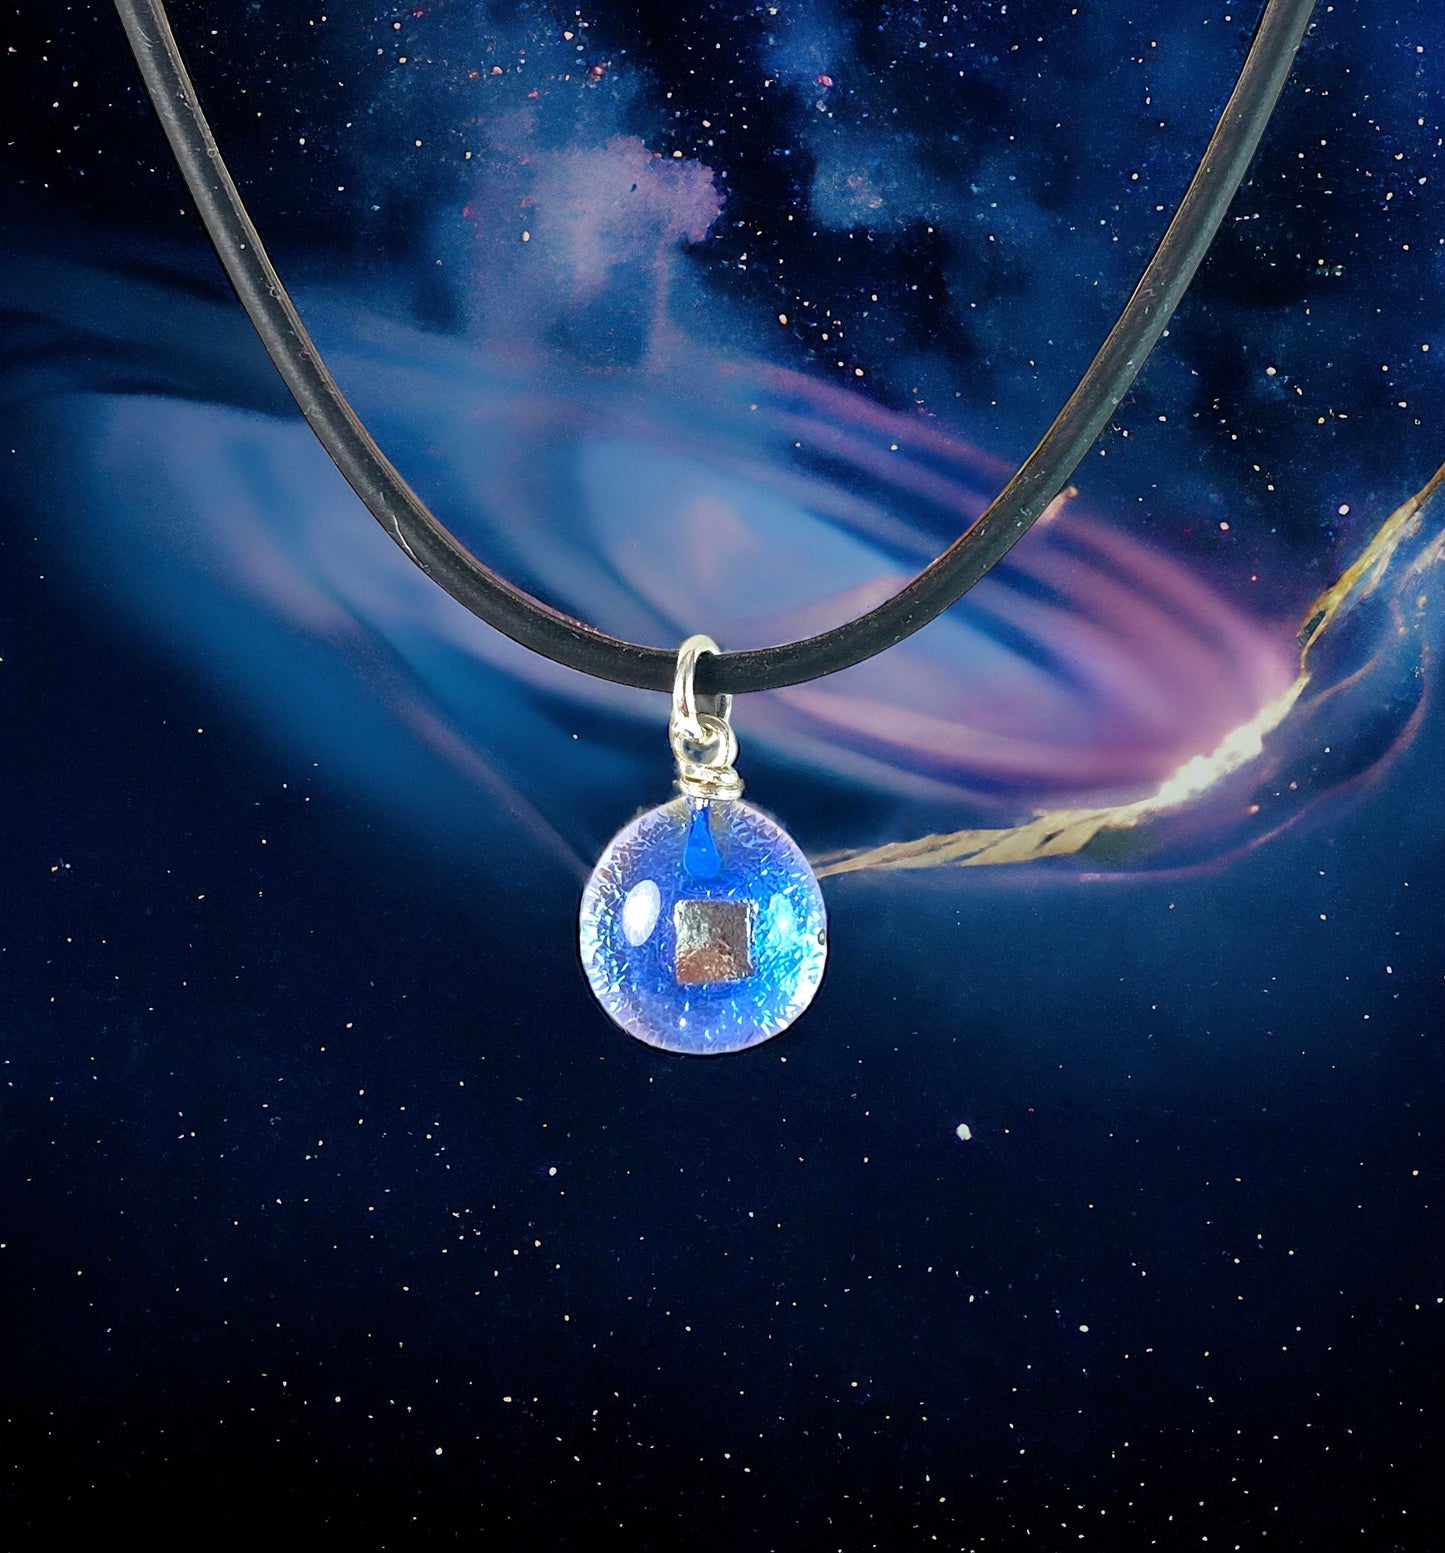 Space Ball Necklace in Sapphire Blue